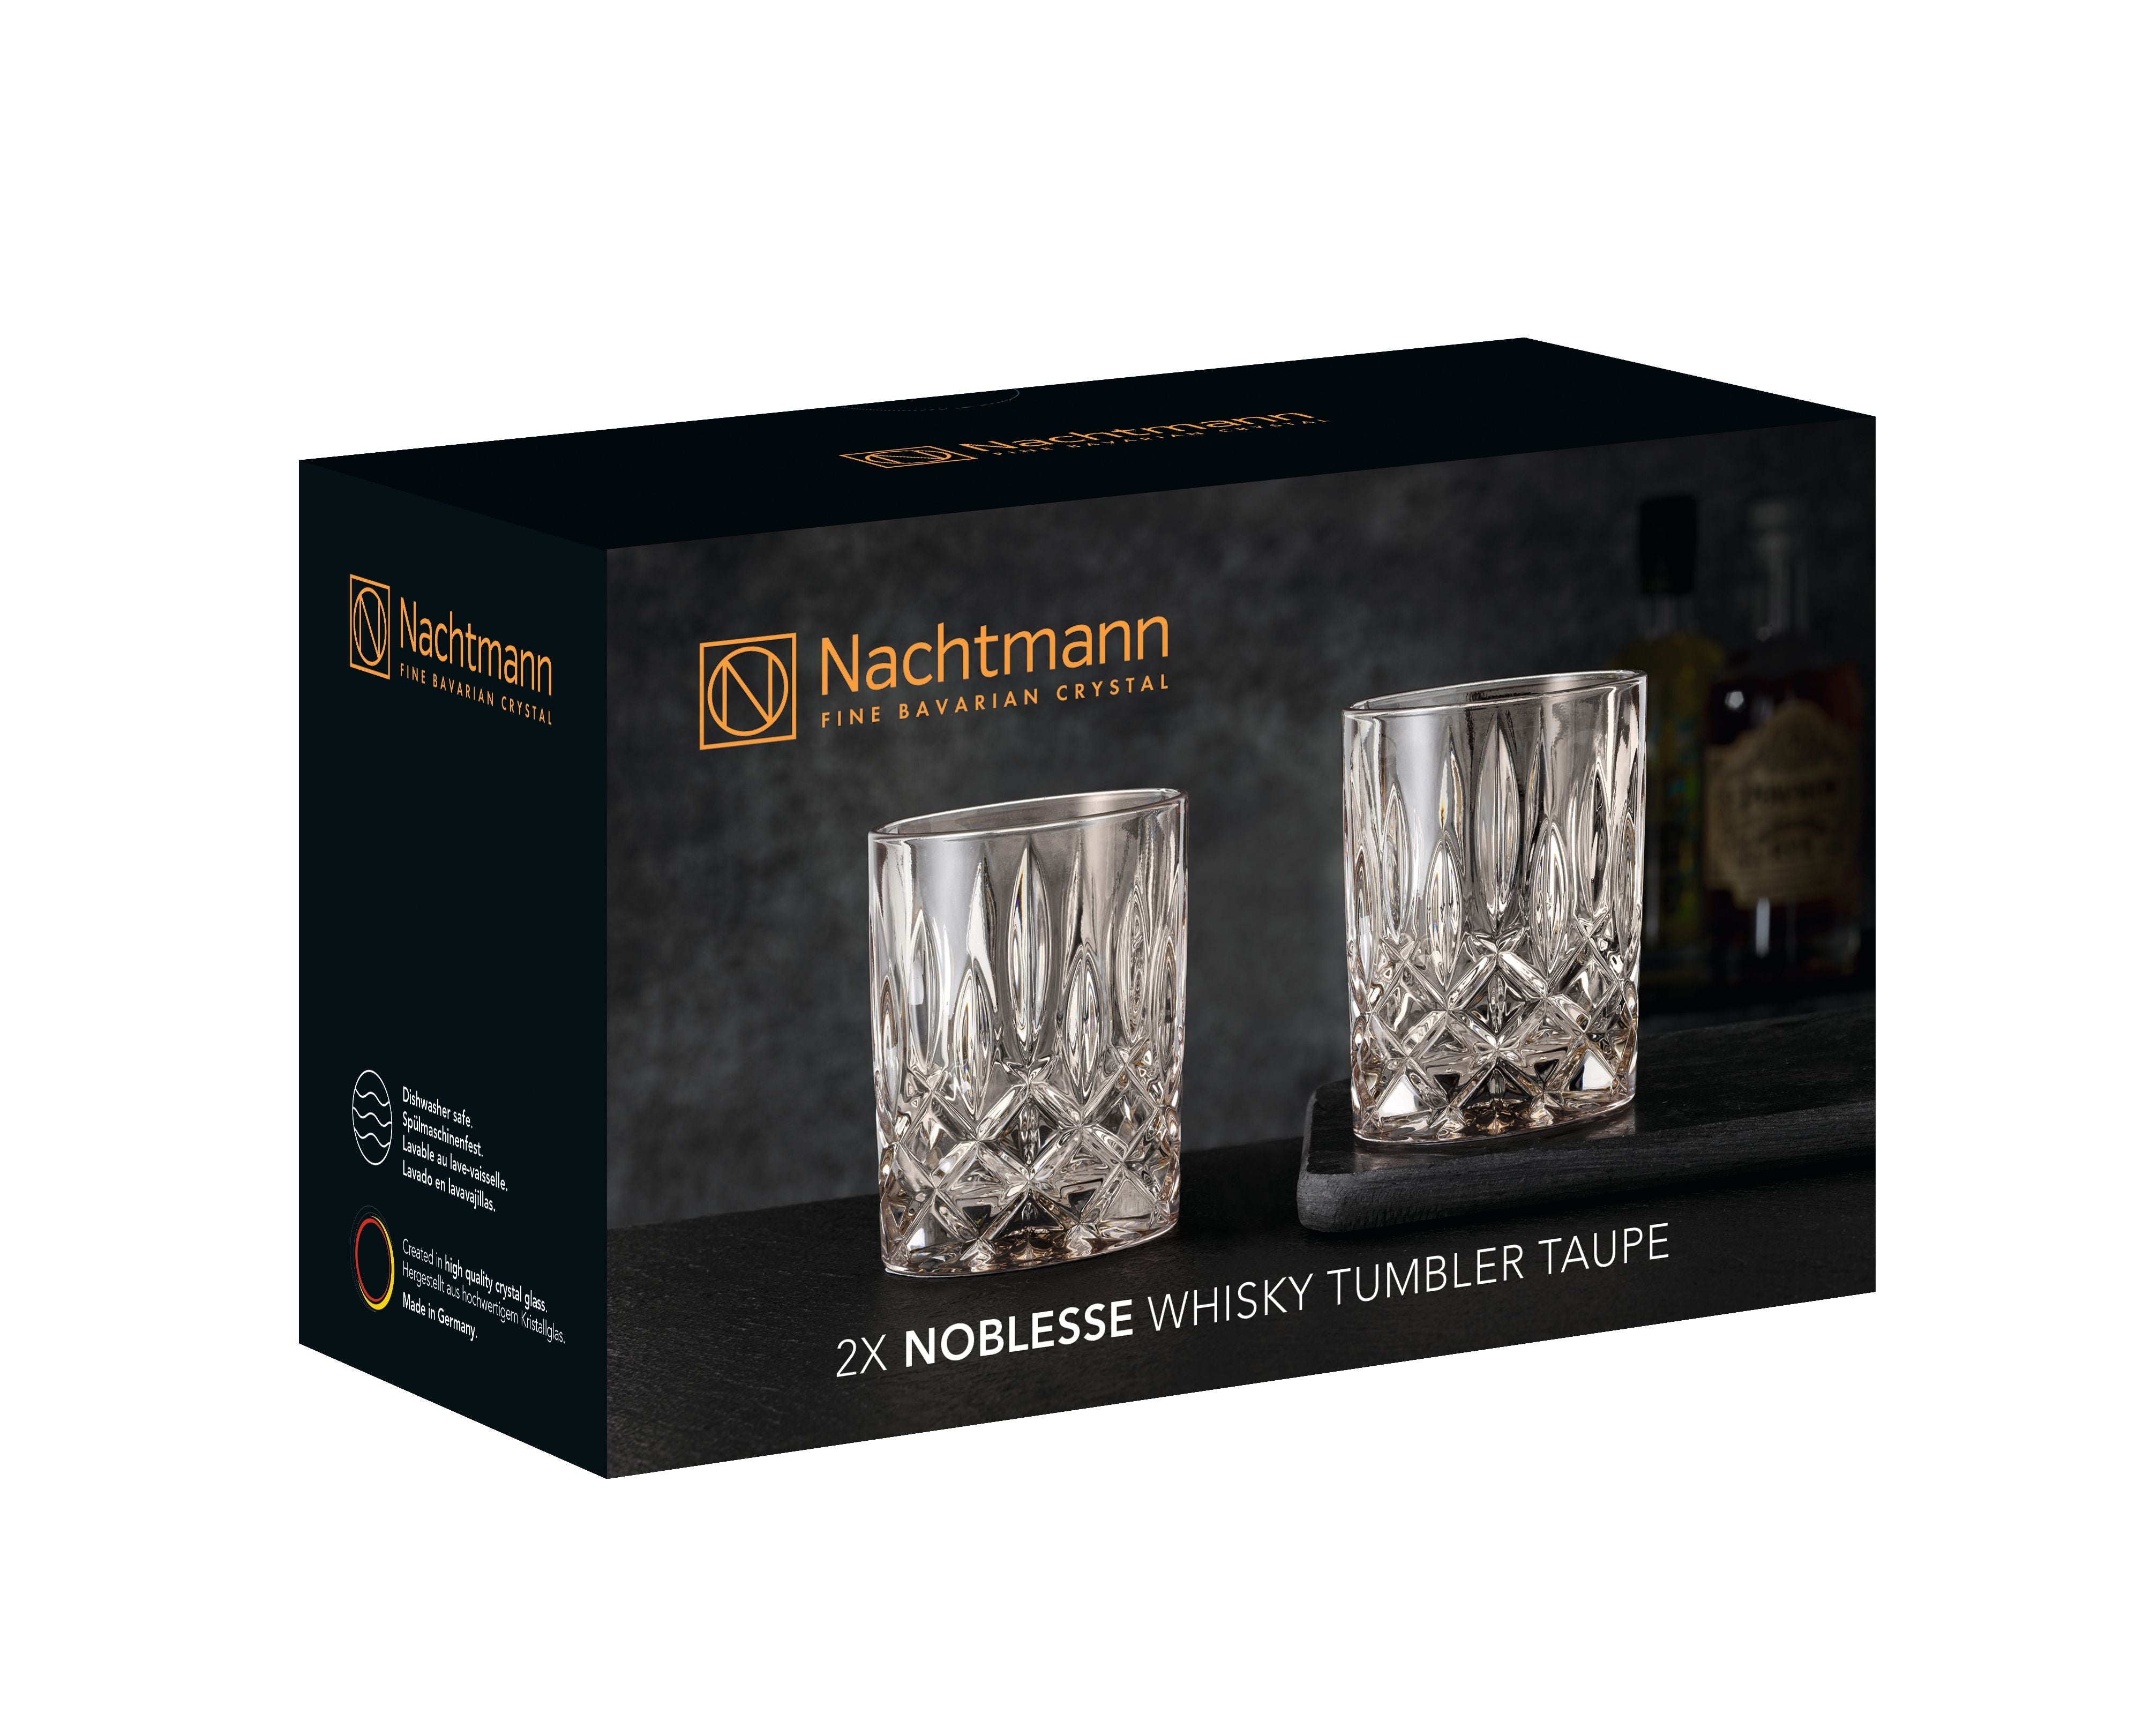 Nachtmann Noblesse Whiskyglas Taupe 295 ml, 2 Stk.